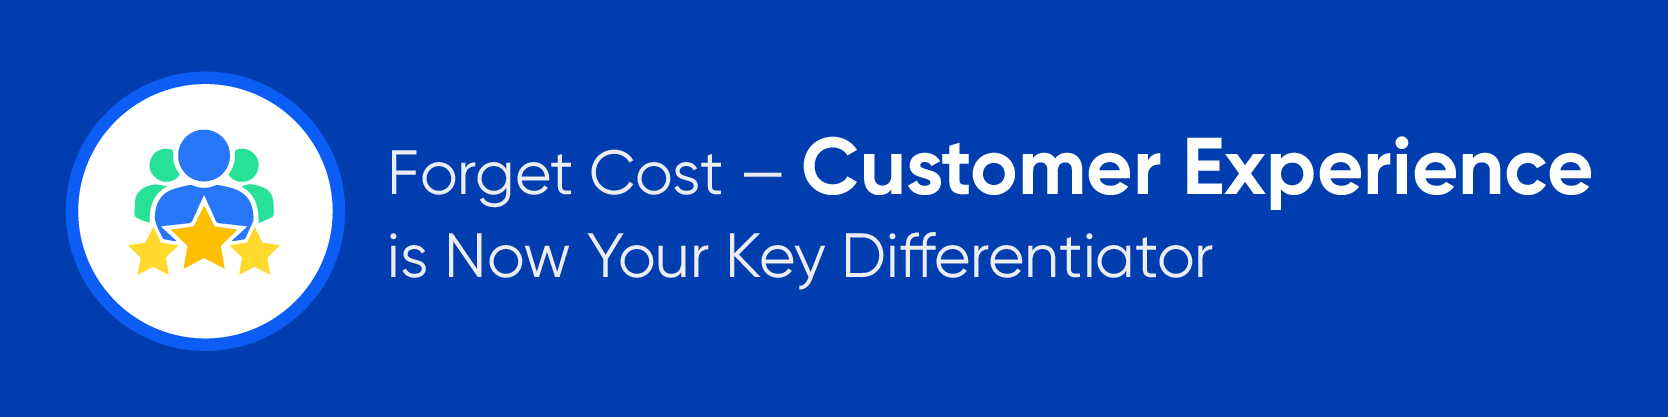 Forget Cost — Customer Experience is Now Your Key Differentiator 